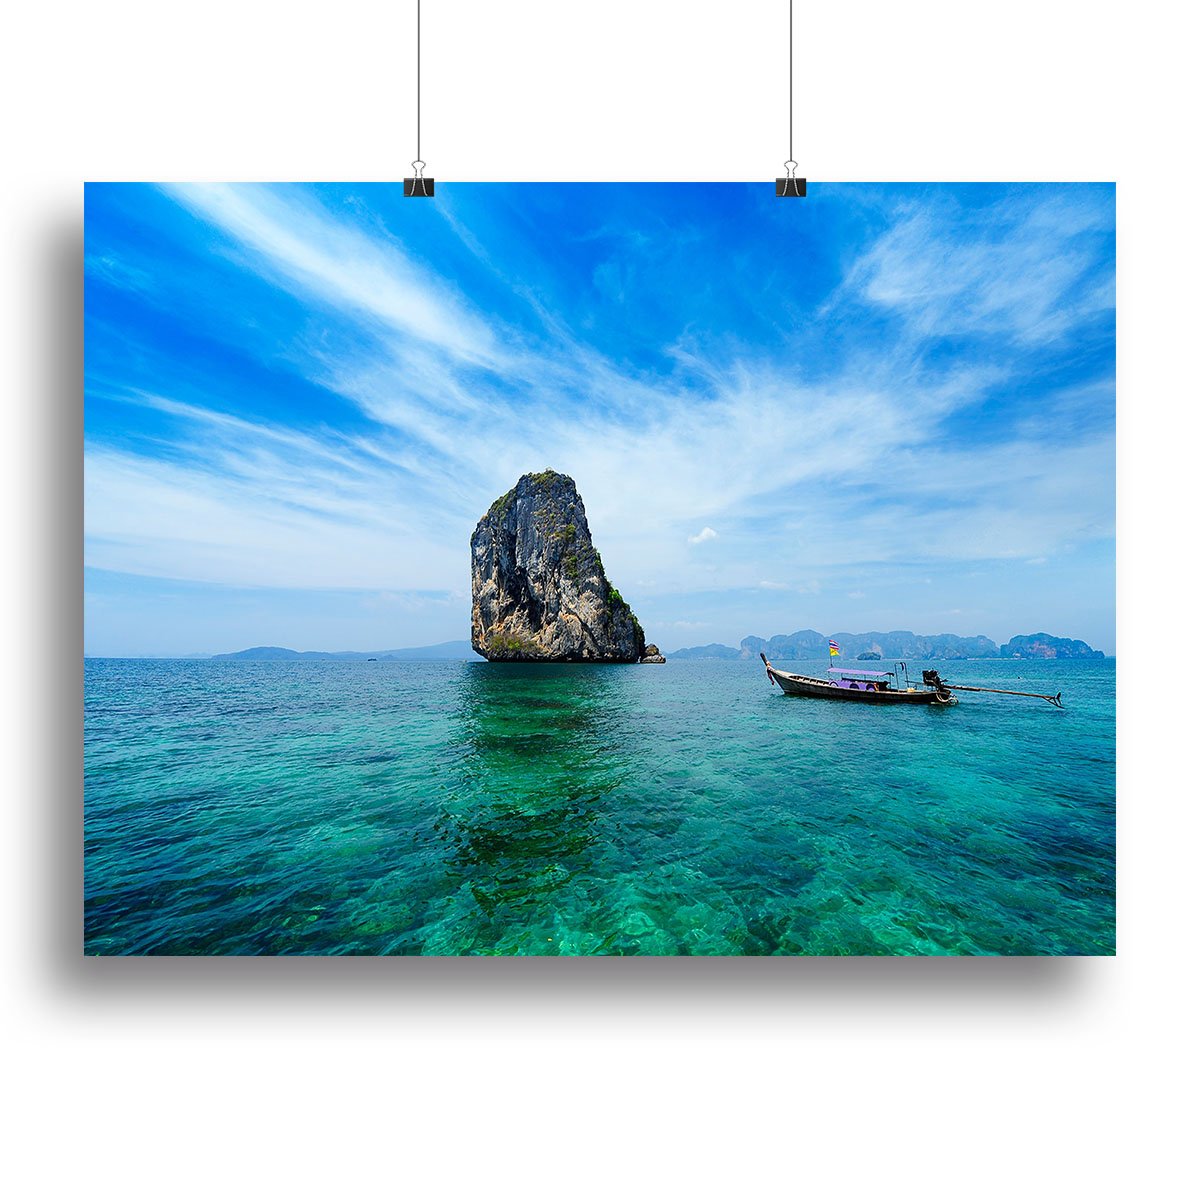 Traditional Thai boat in the blue sea Canvas Print or Poster